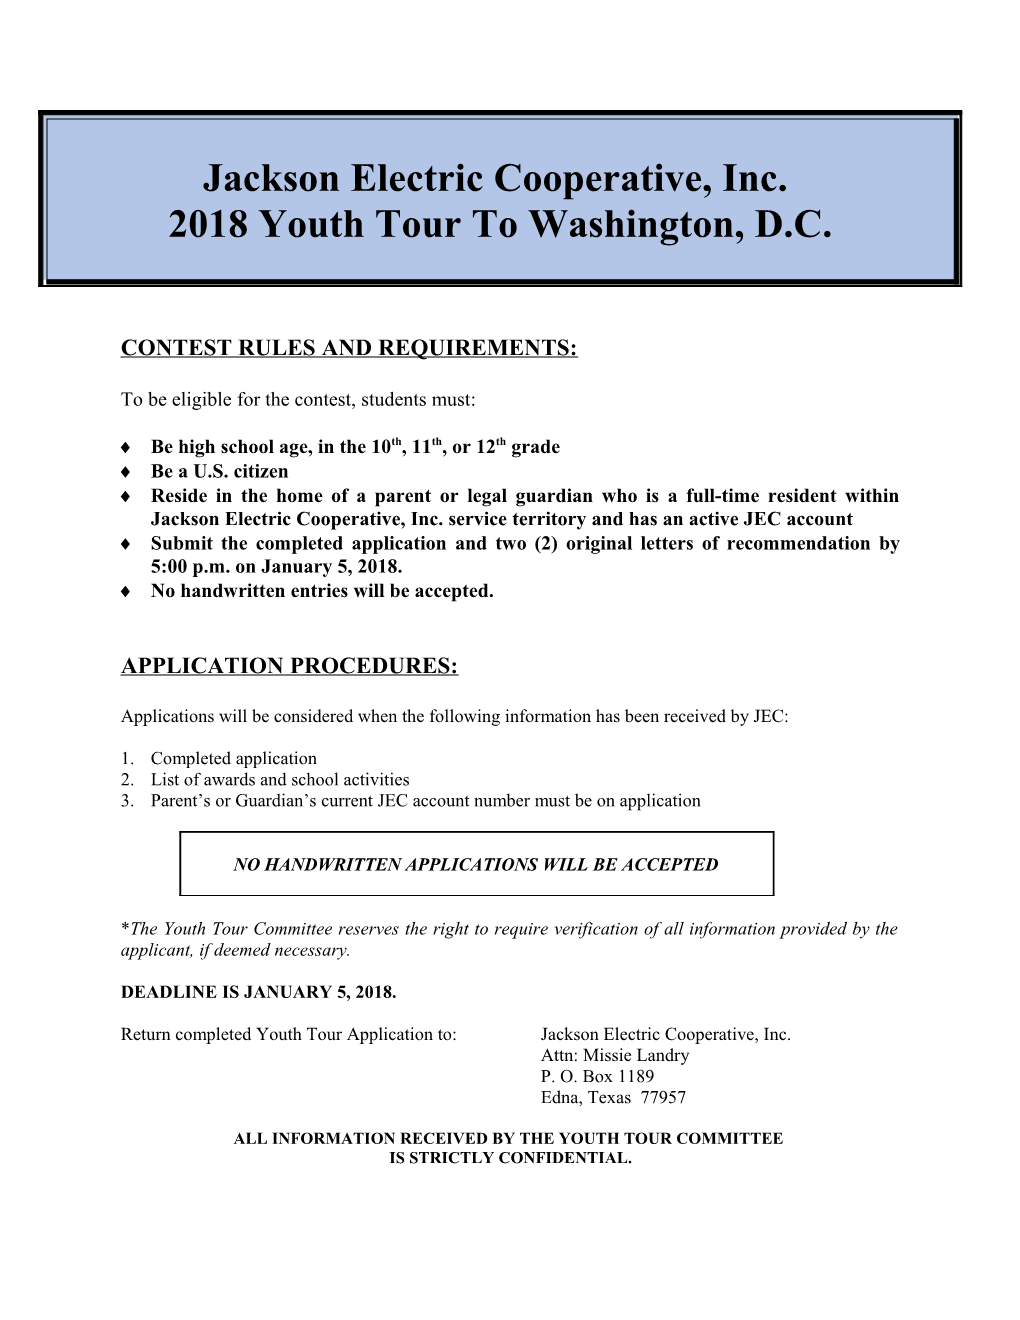 Fayette Electric Cooperative, Inc